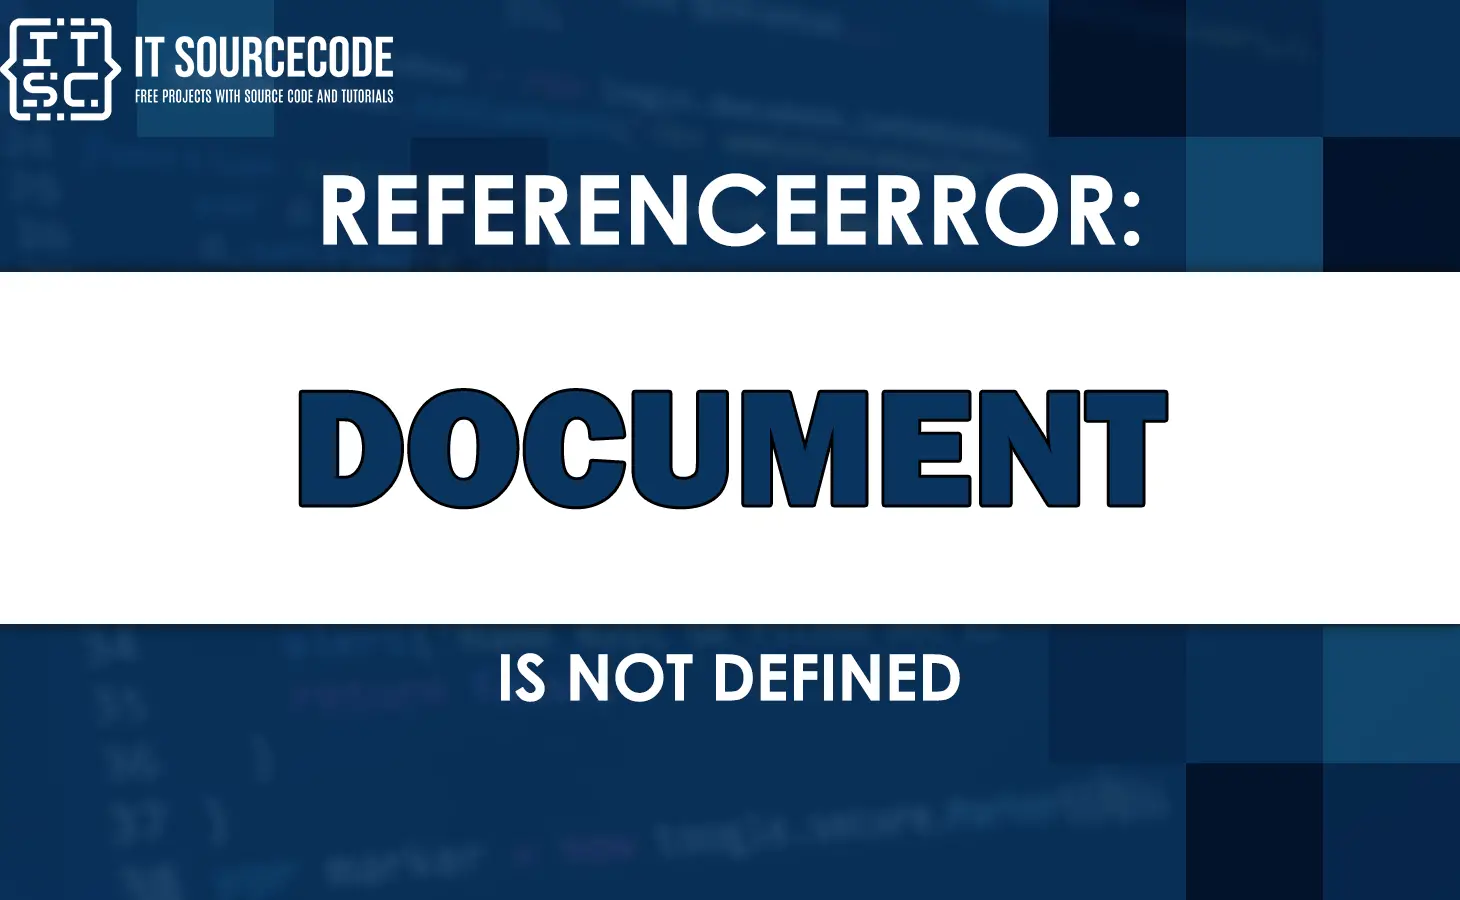 Referenceerror document is not defined [SOLVED]